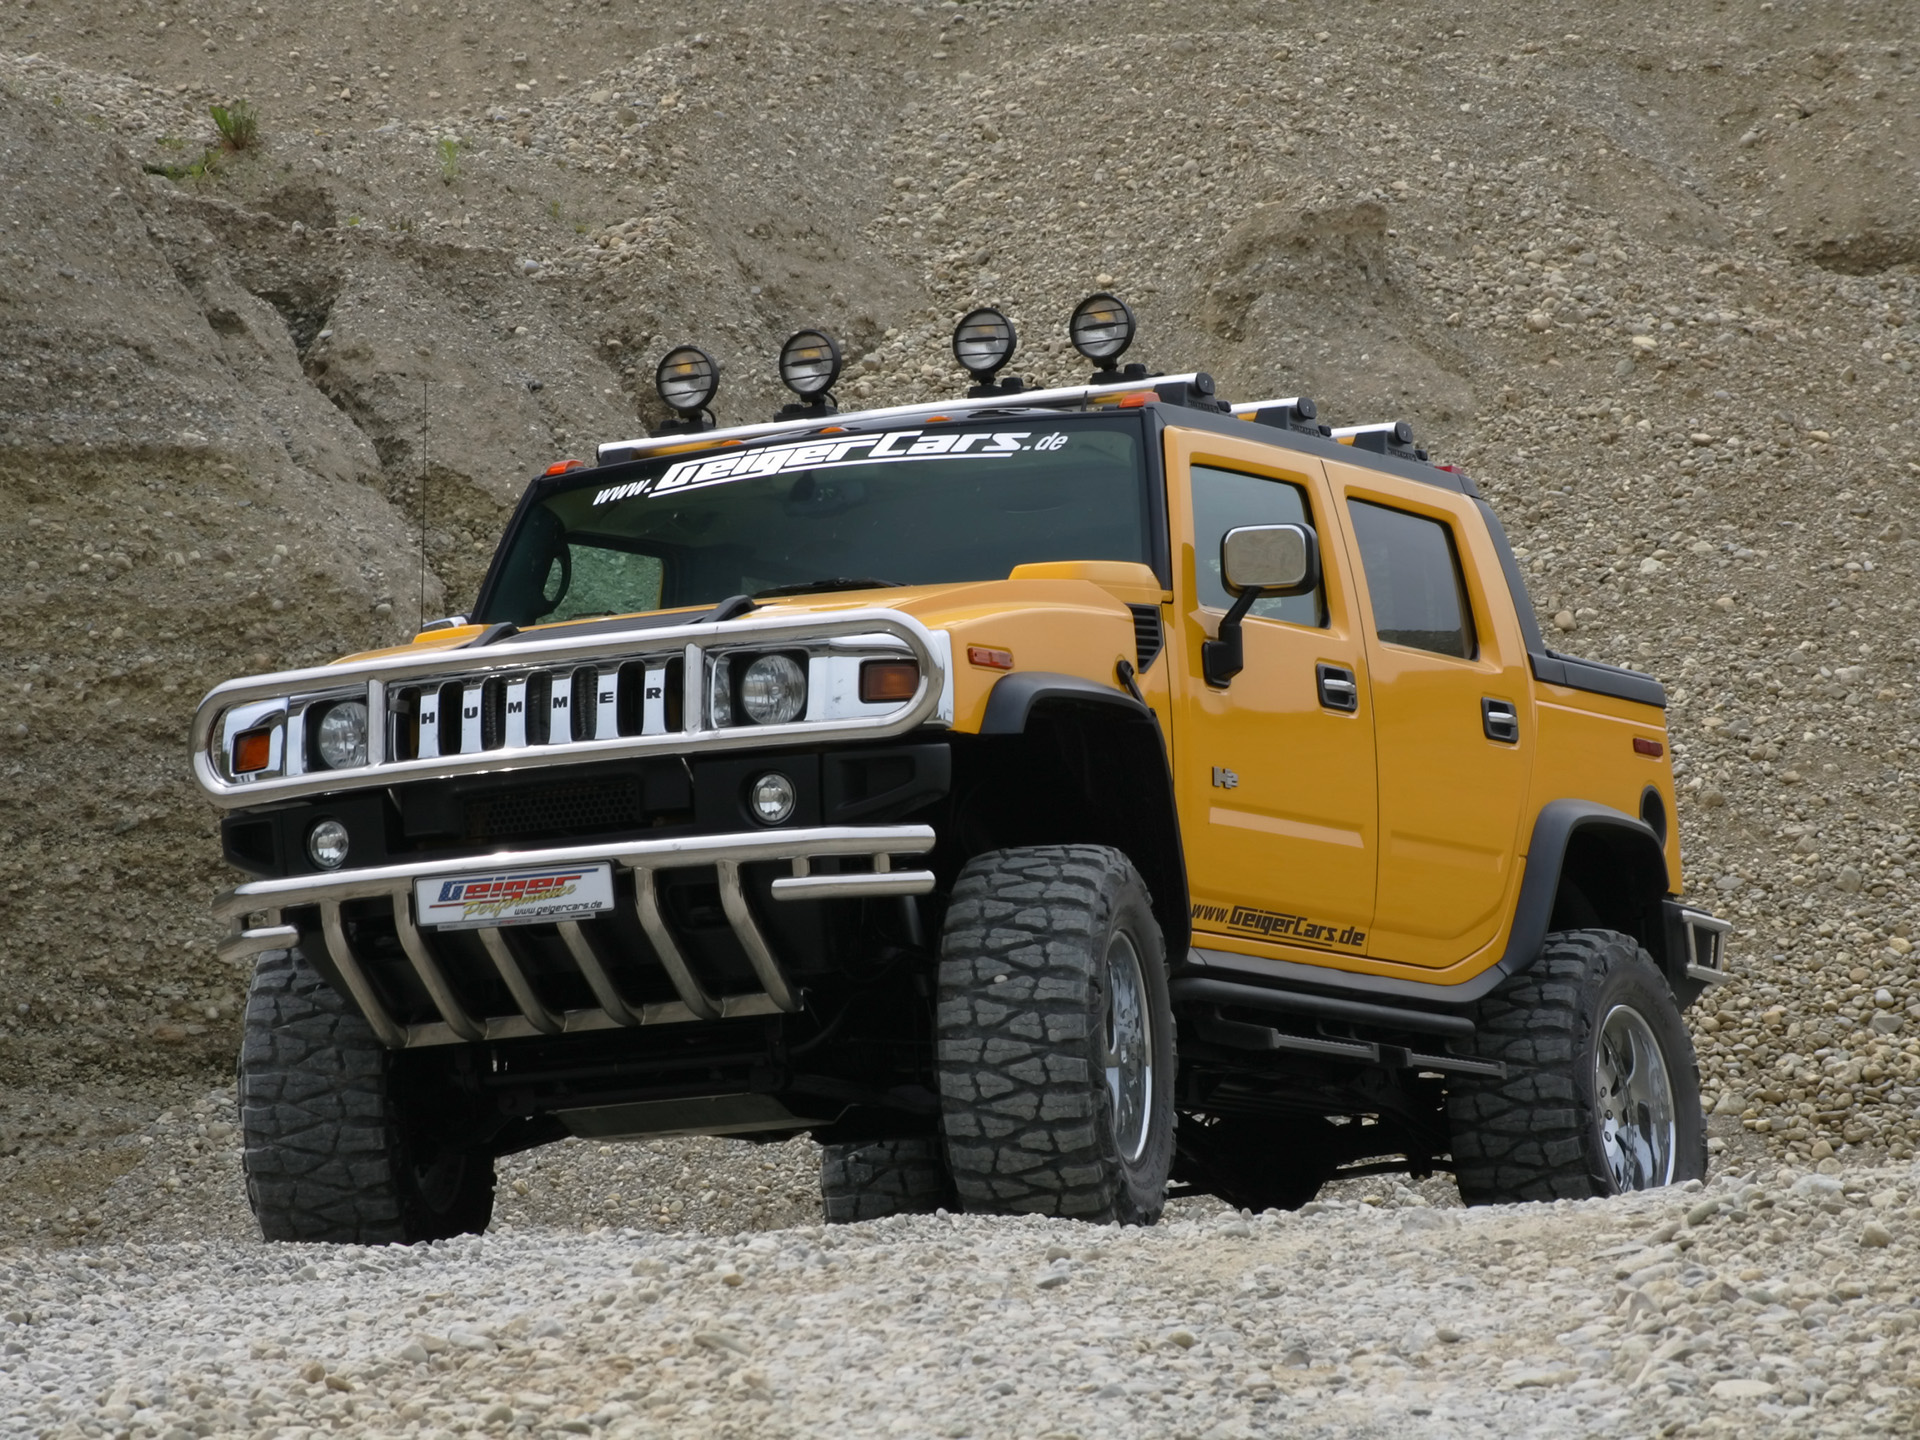 Geigercars Hummer H2 Hannibal photos - PhotoGallery with 6 pics ...